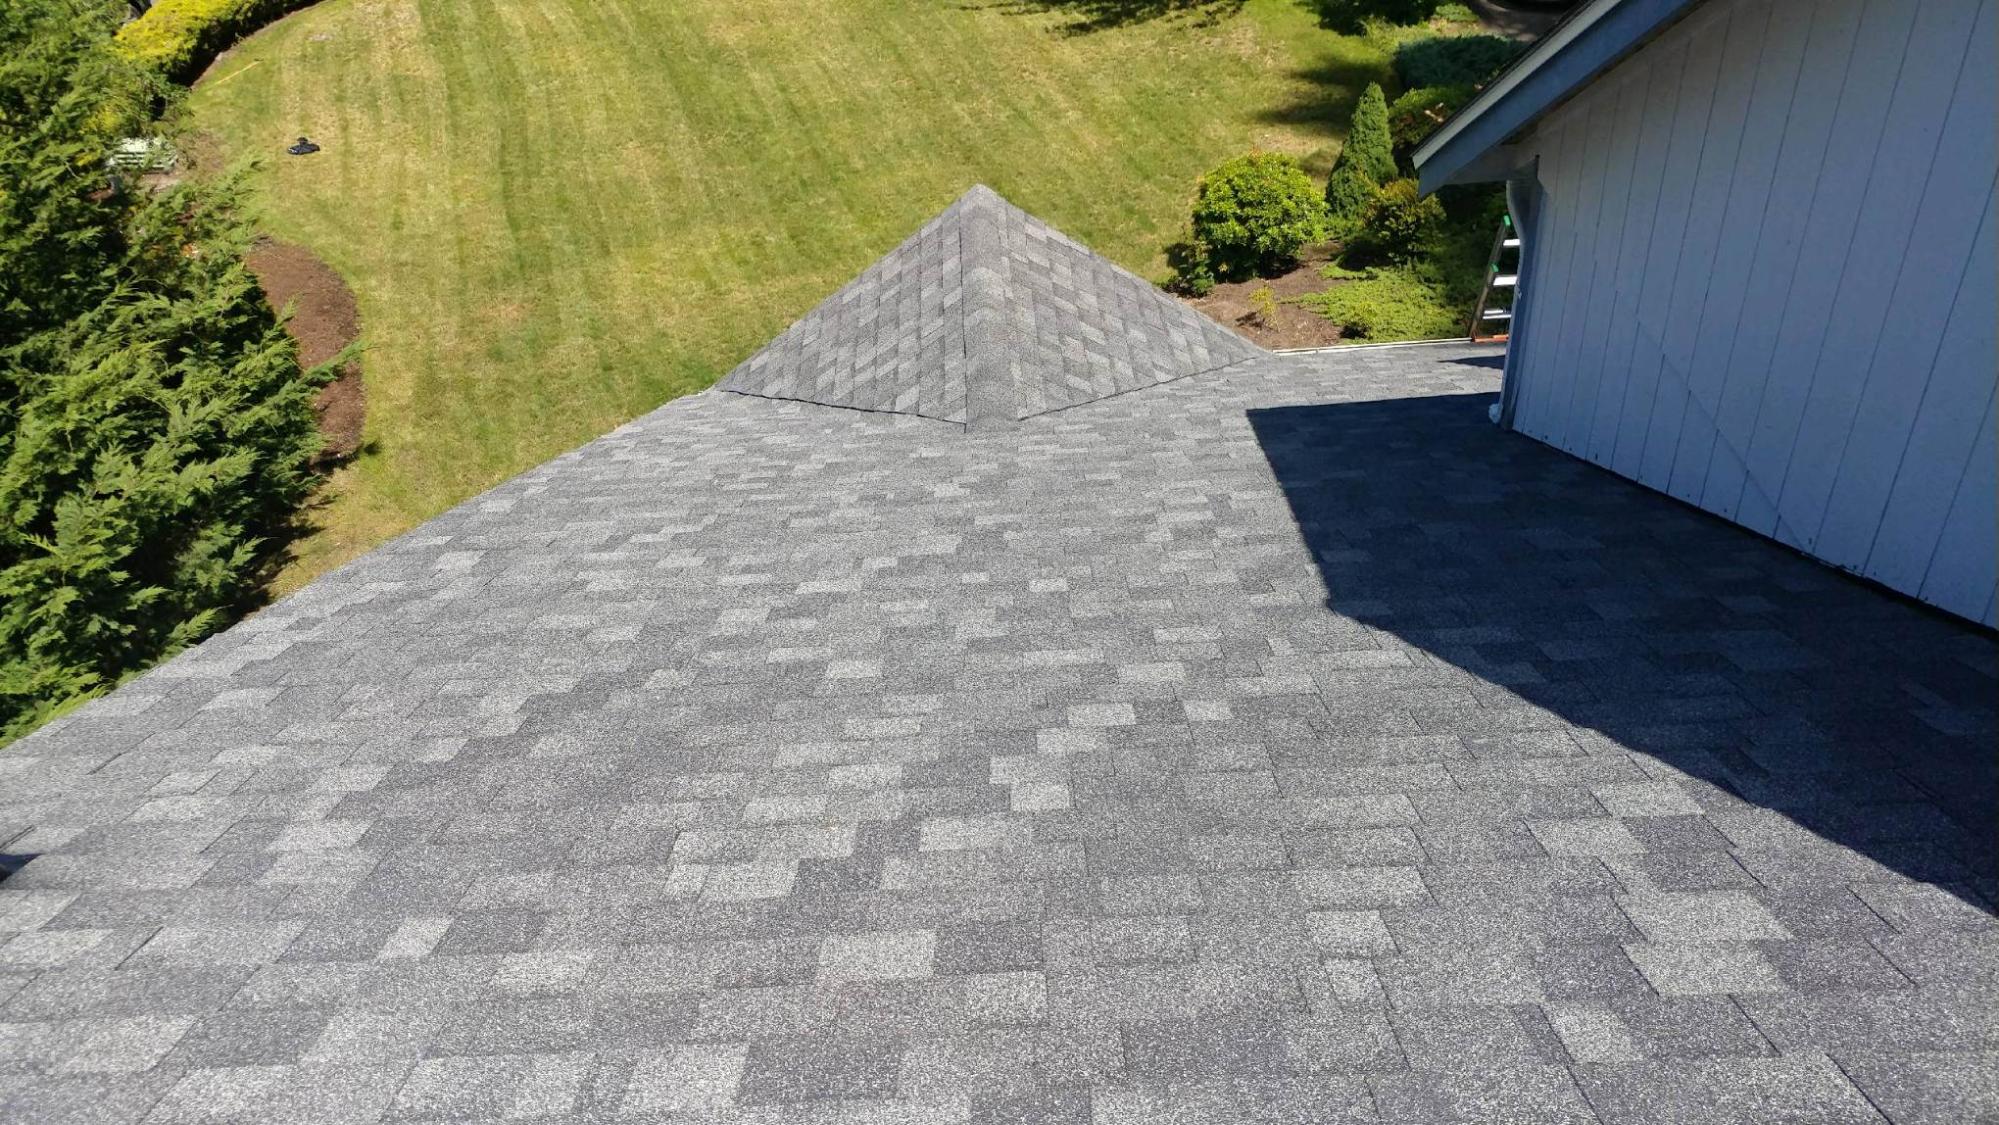 A newly completed roof after re-roofing.